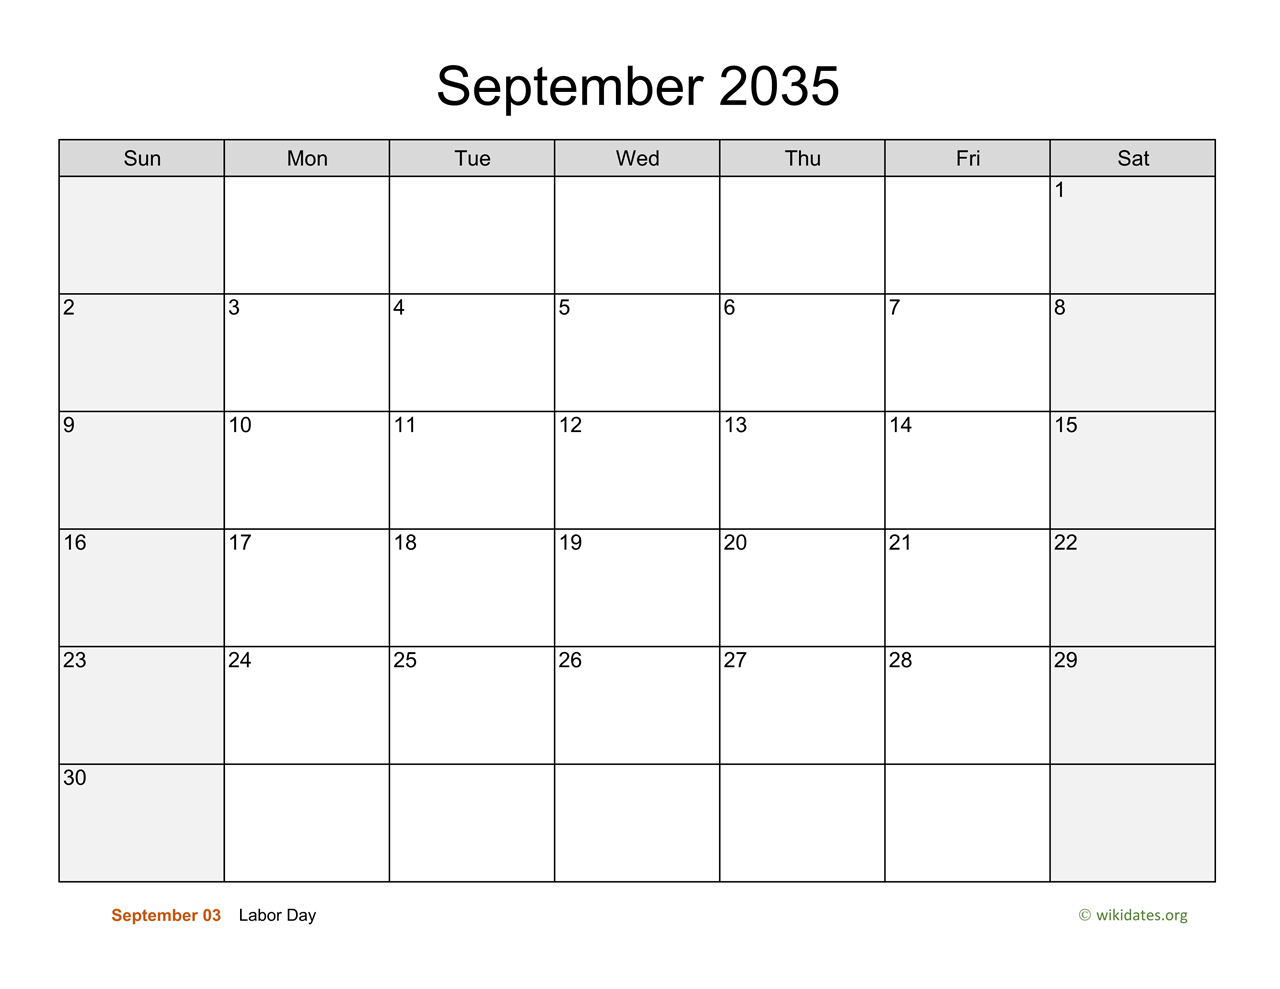 September 2035 Calendar with Weekend Shaded | WikiDates.org